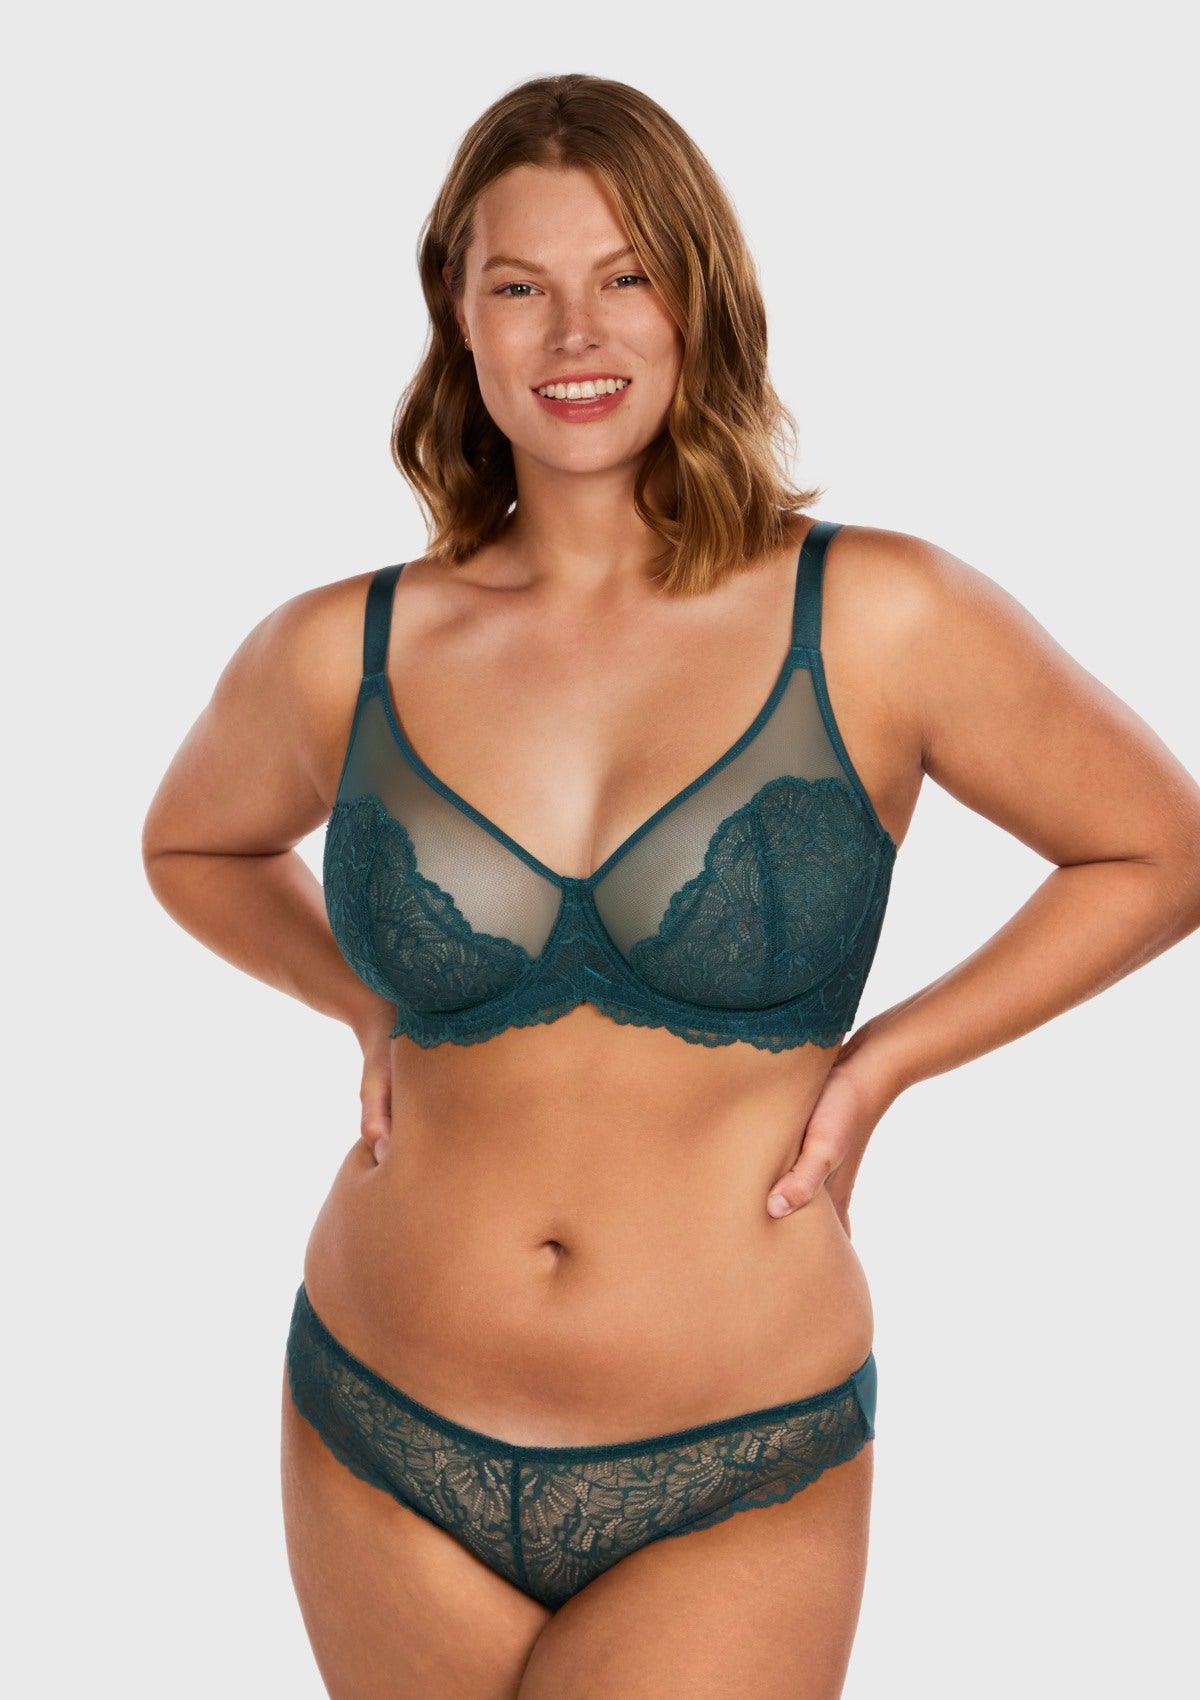 HSIA Blossom Full Figure See-Through Lace Bra For Side And Back Fat - Balsam Blue / 34 / C